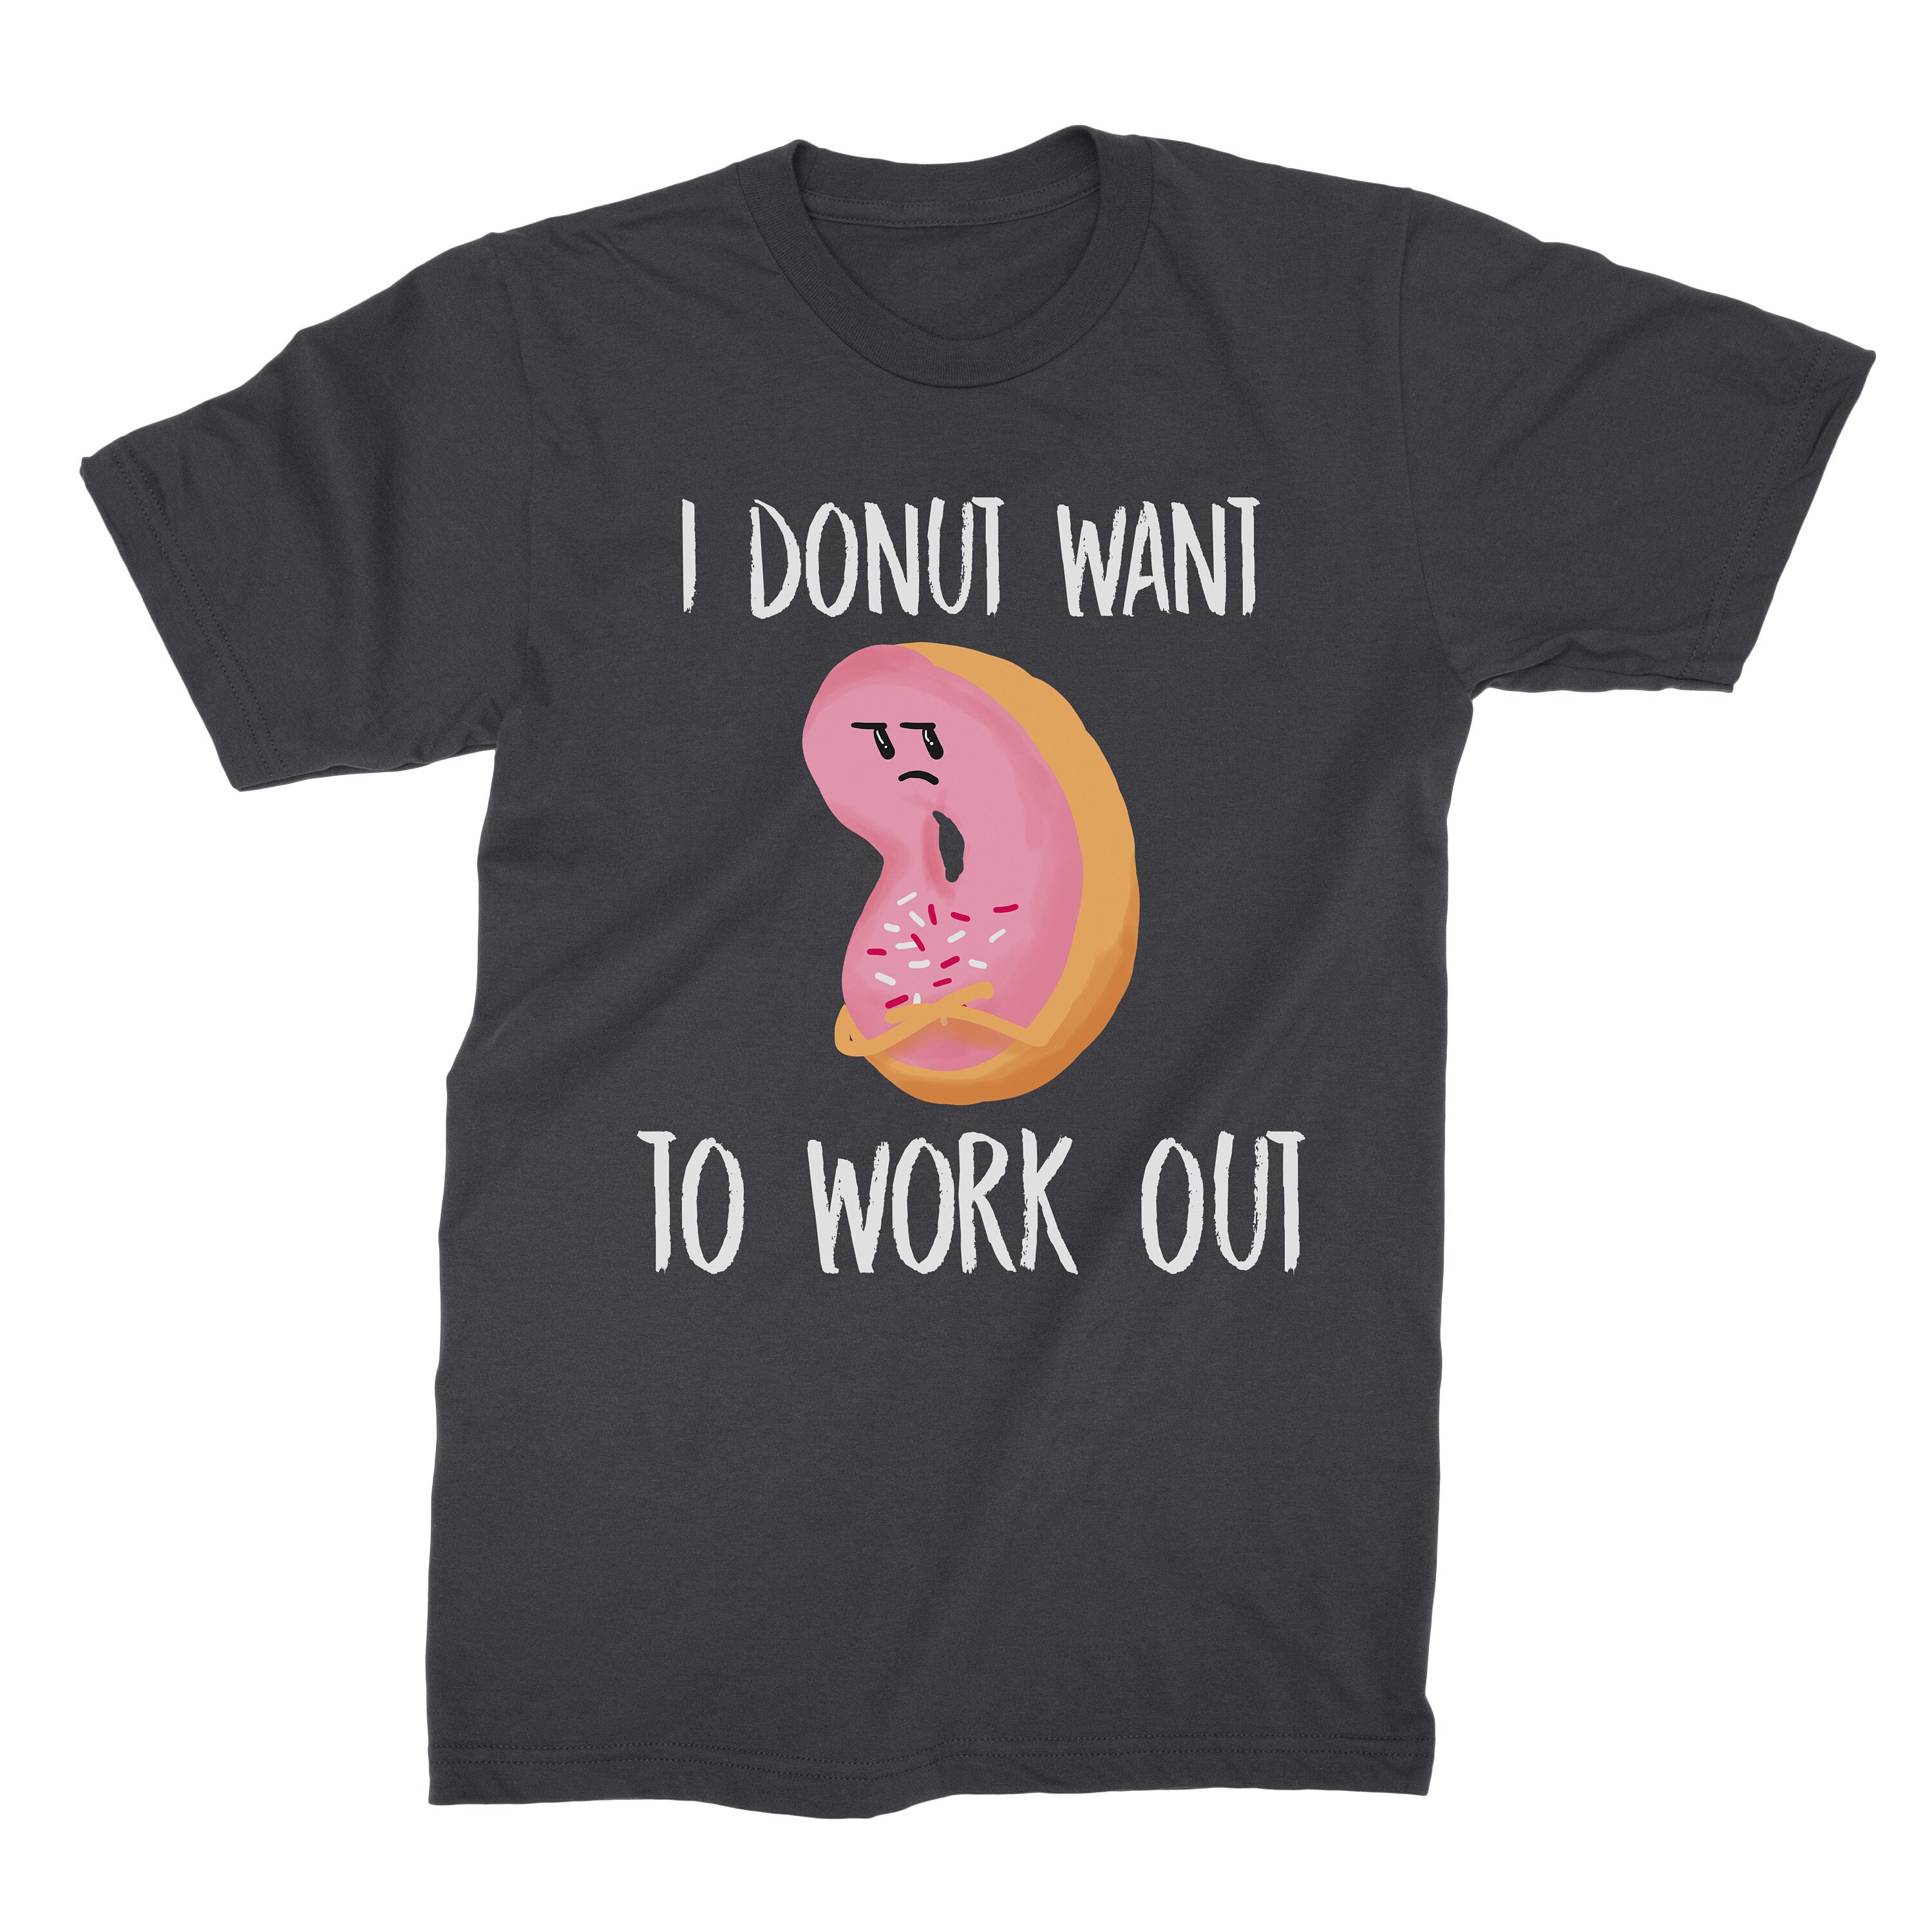 I Donut Want to Work Out Donut Donut Shirt Funny Donut | Etsy